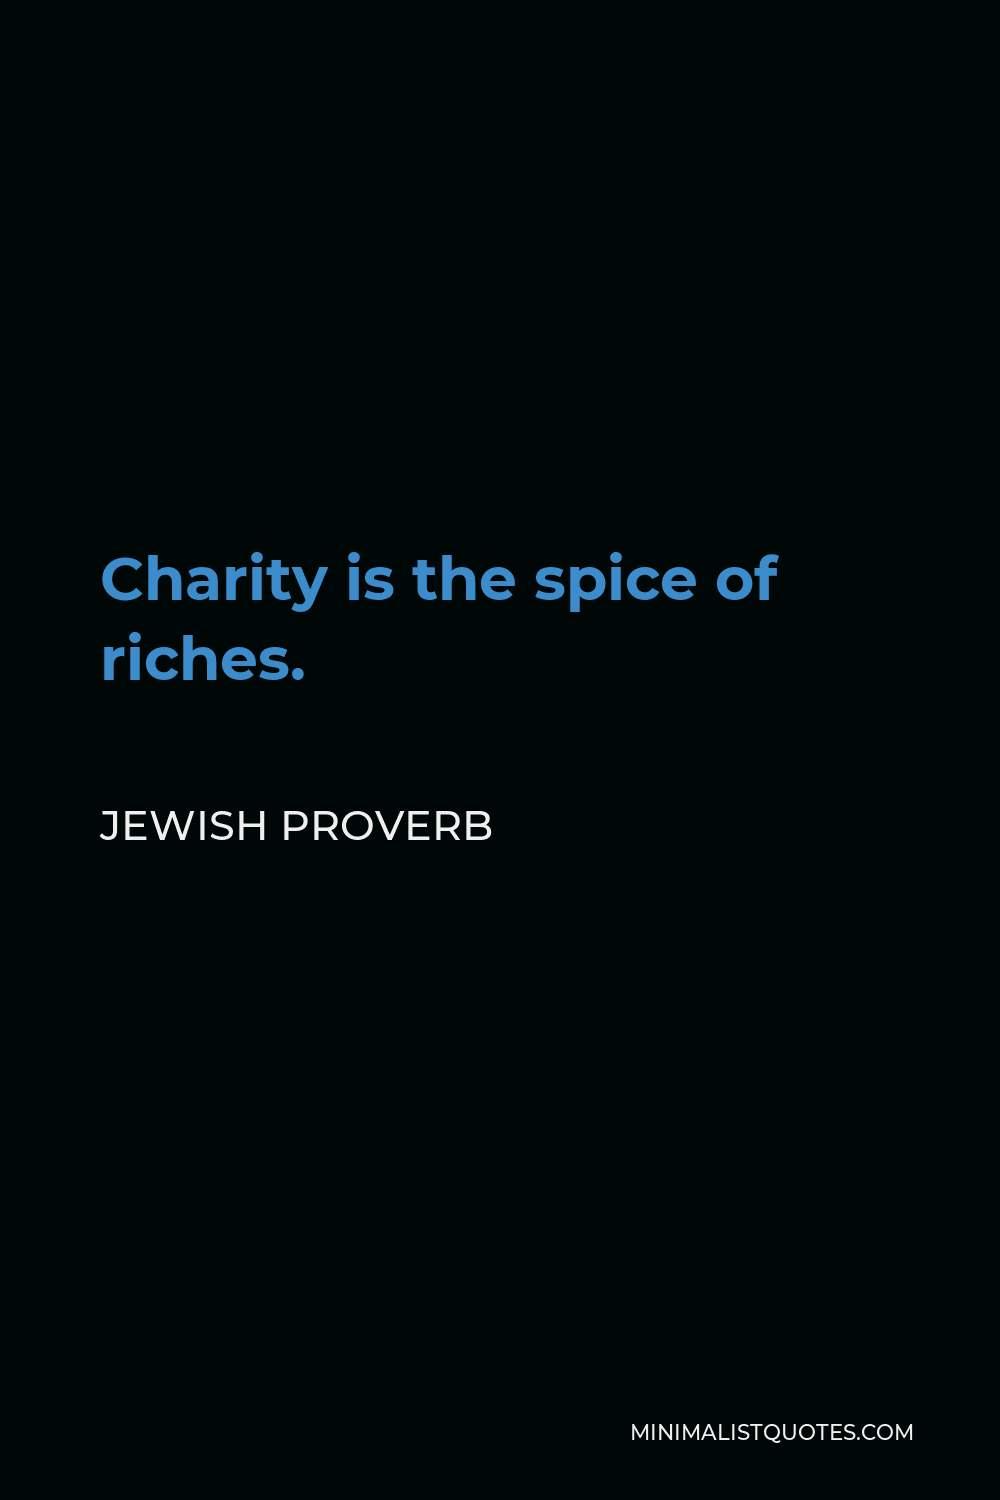 Jewish Proverb Quote - Charity is the spice of riches.